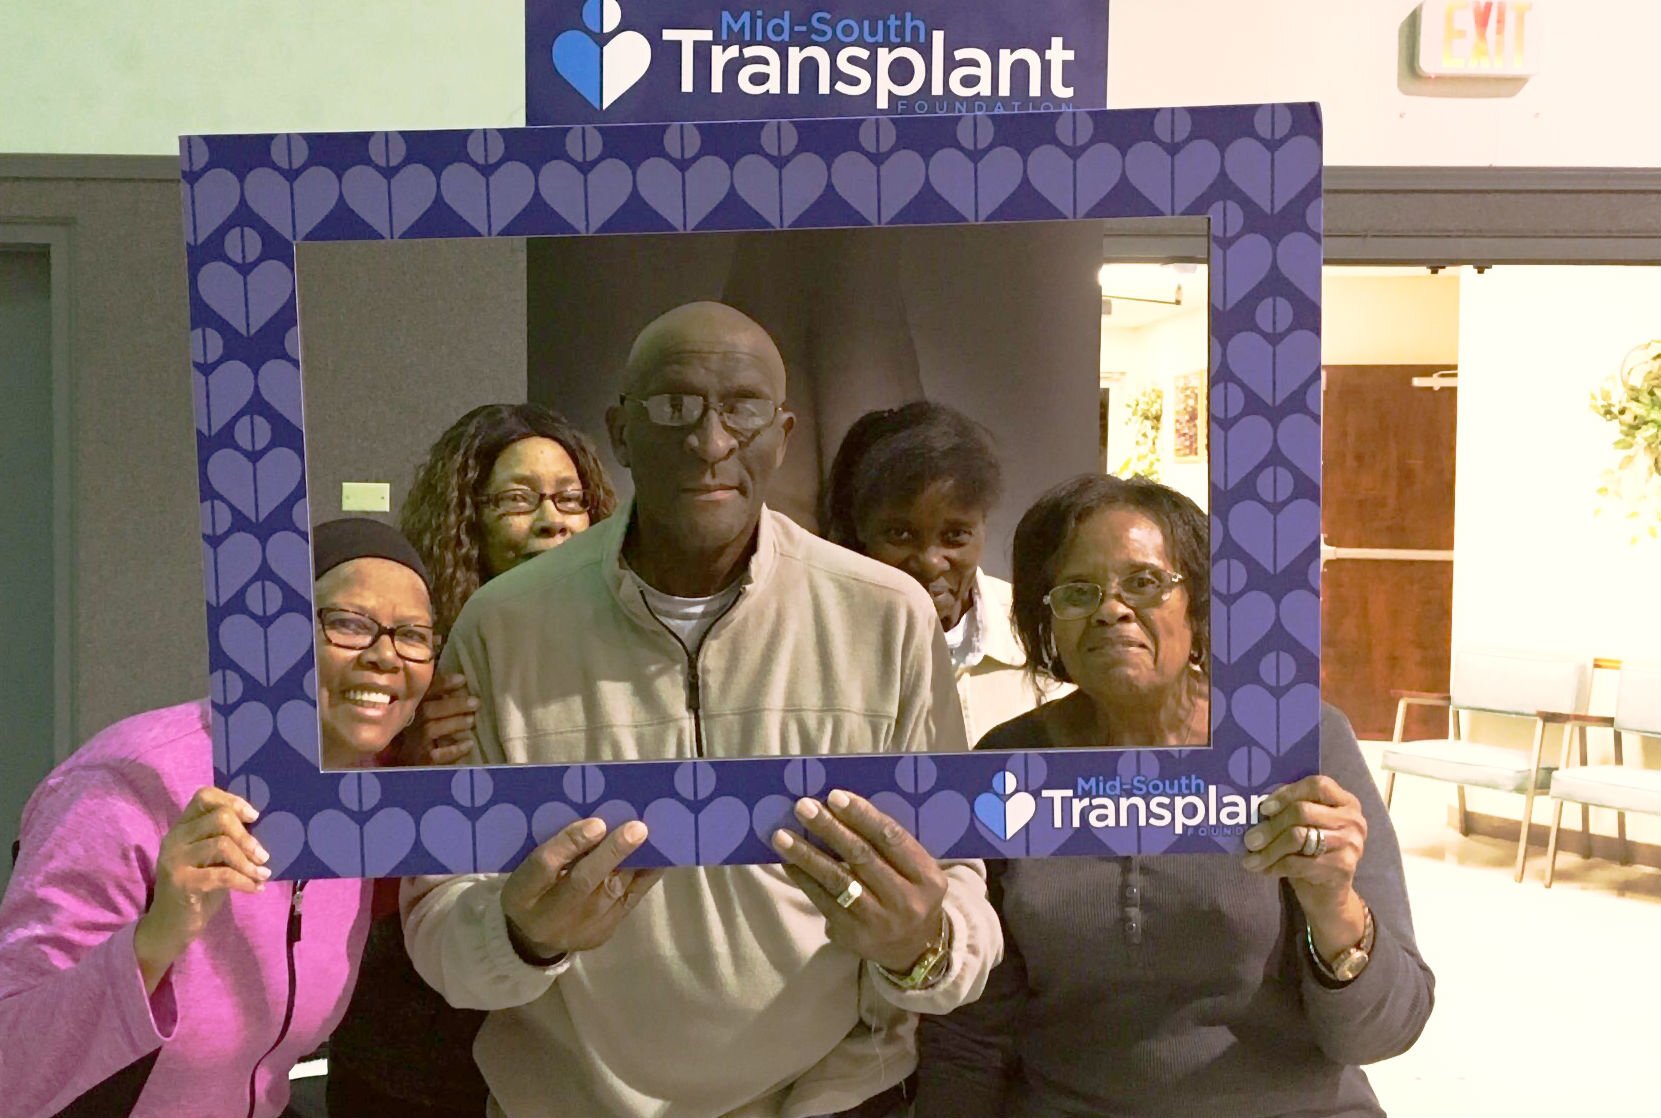 On February 7, “A Family Affair” will feature music, discussions, and games aimed at debunking myths and raising awareness of the need for organ donation among black Mid-Southerners. (Mid-South Transplant Foundation)